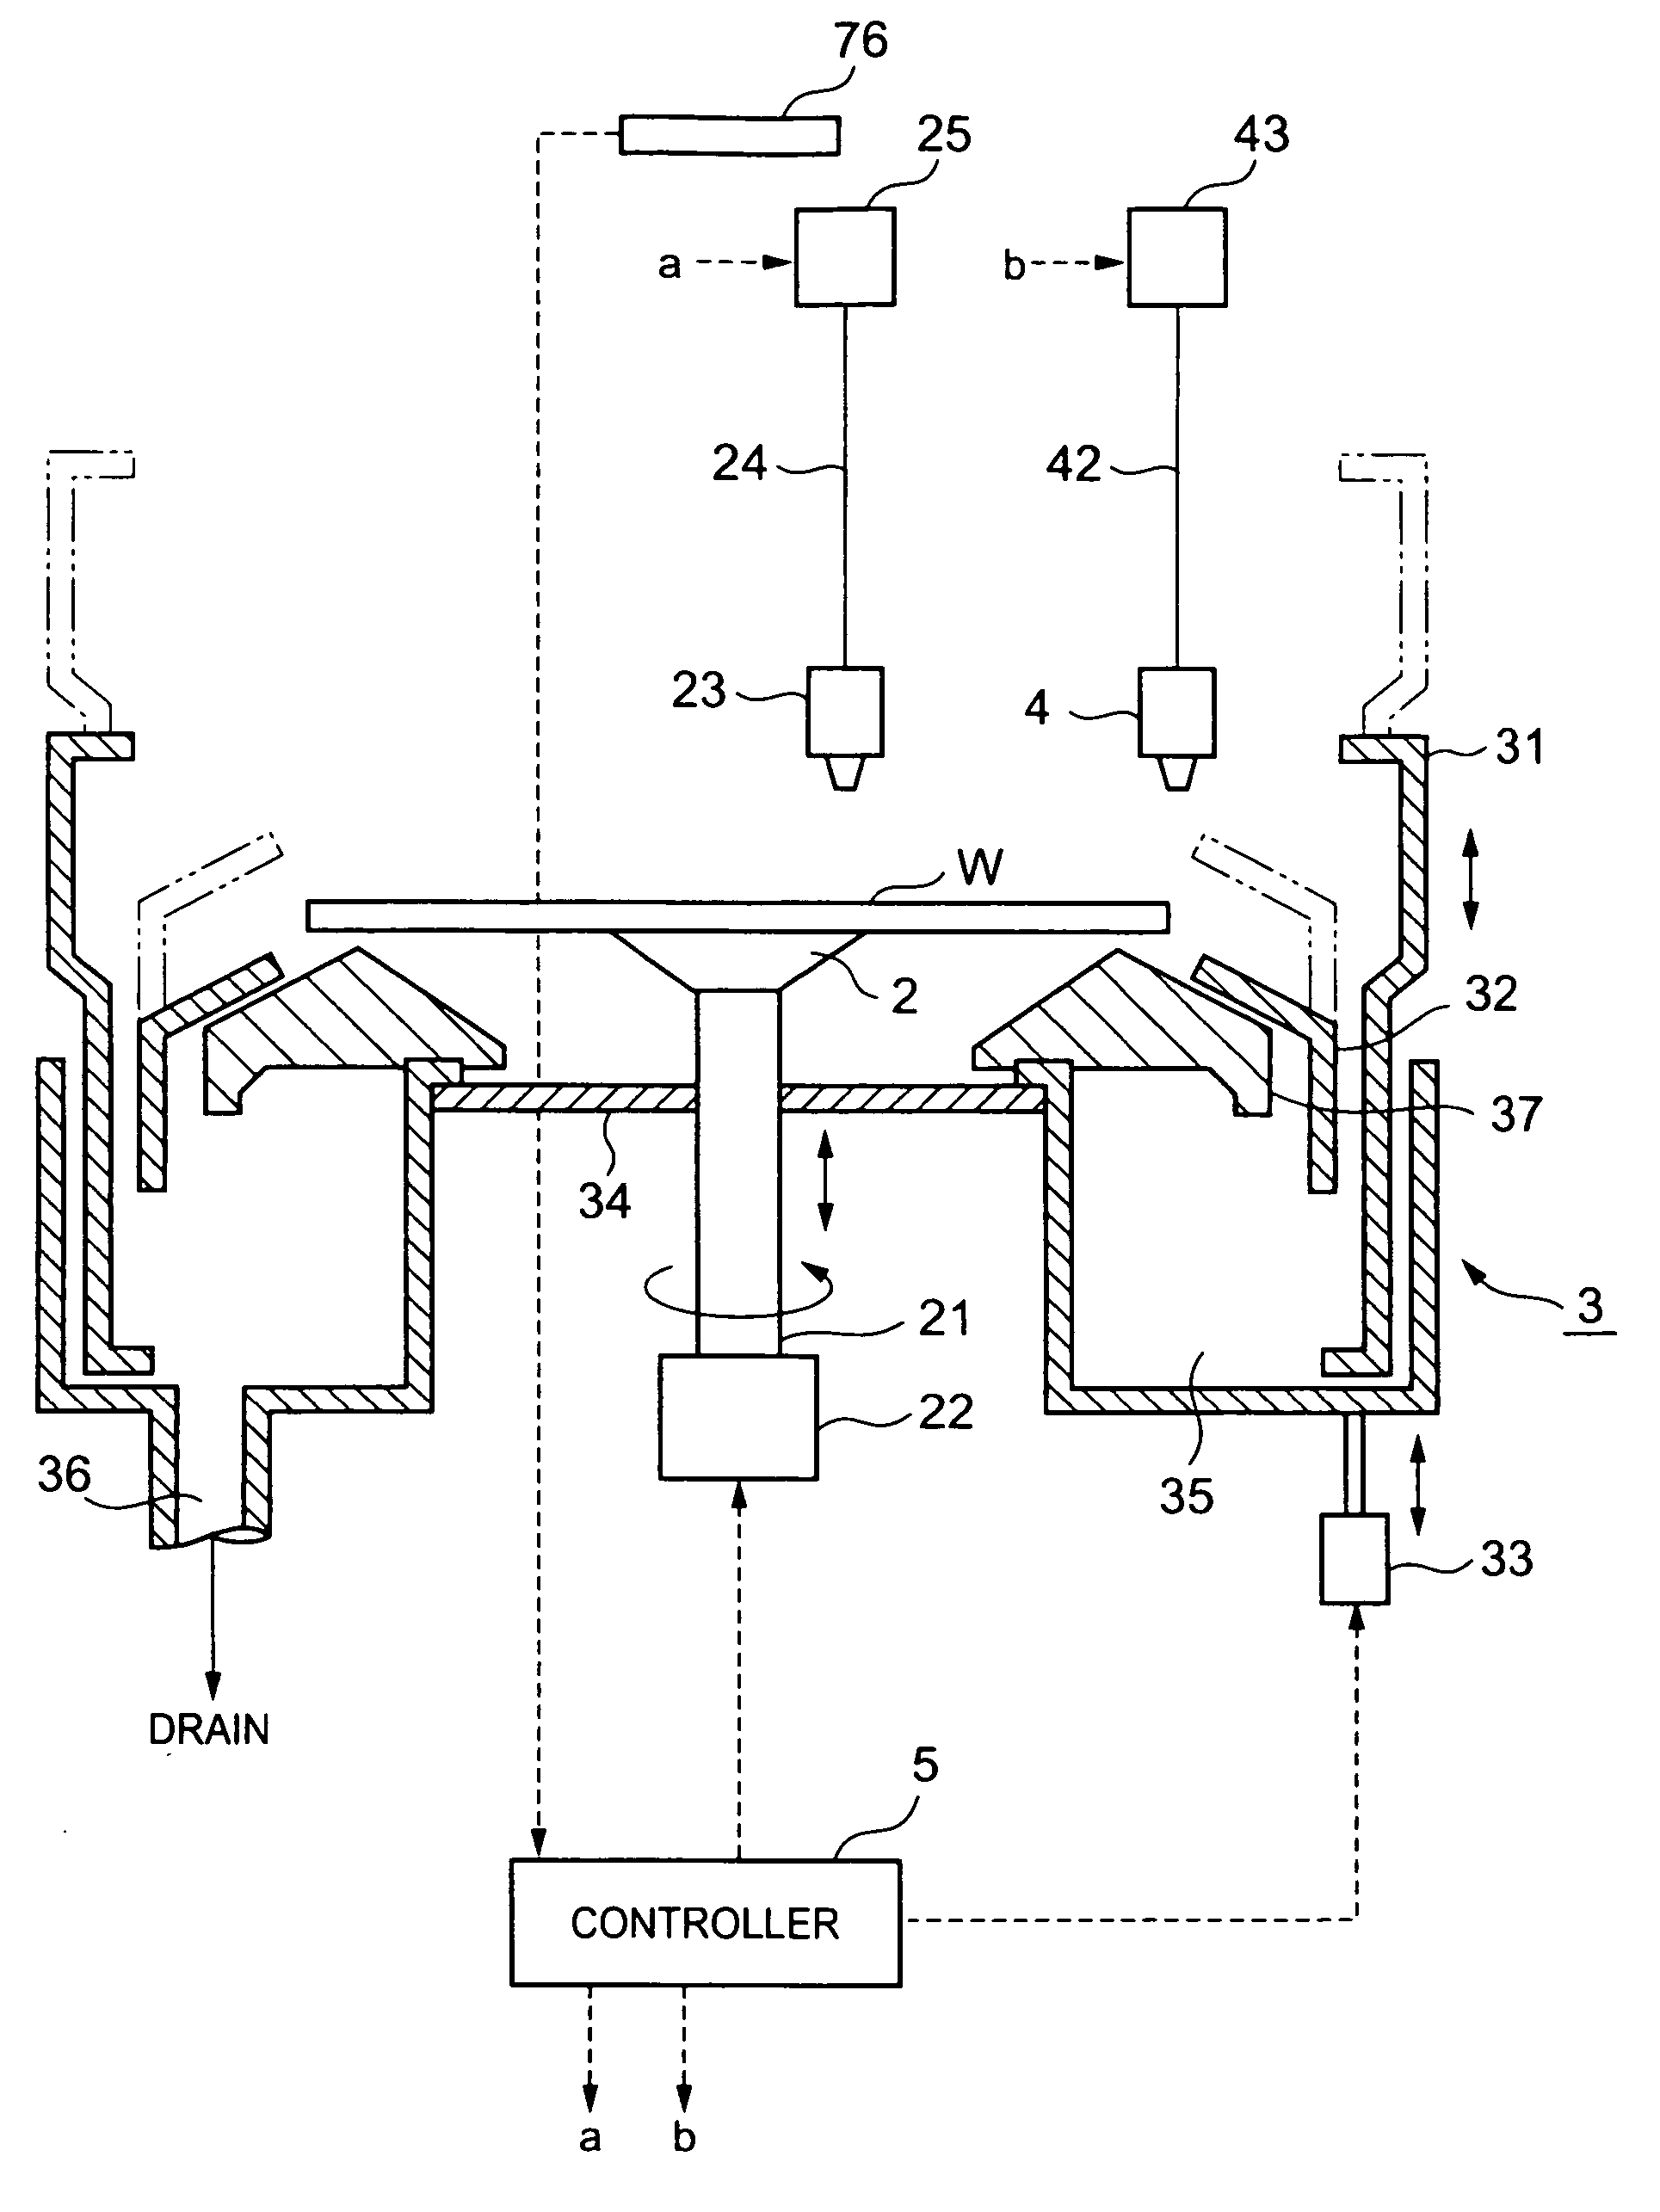 Substrate cleaning method and developing apparatus